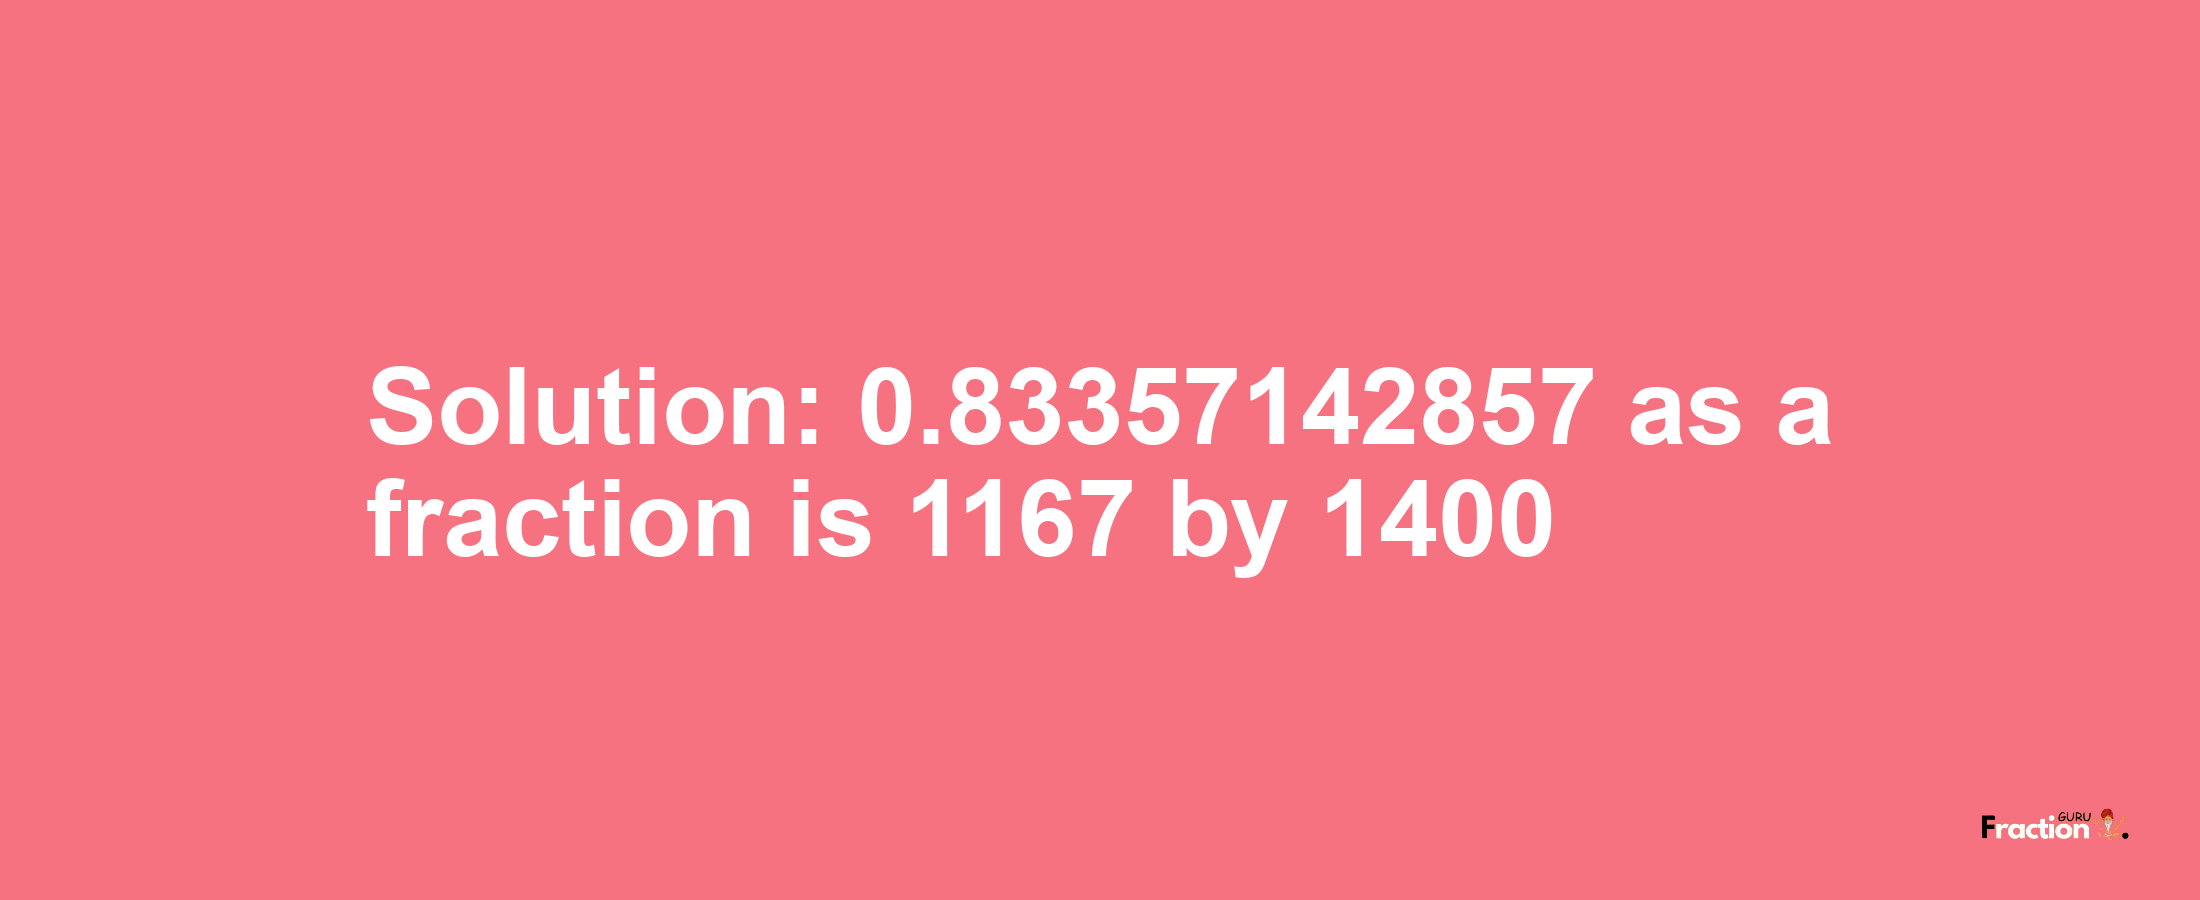 Solution:0.83357142857 as a fraction is 1167/1400